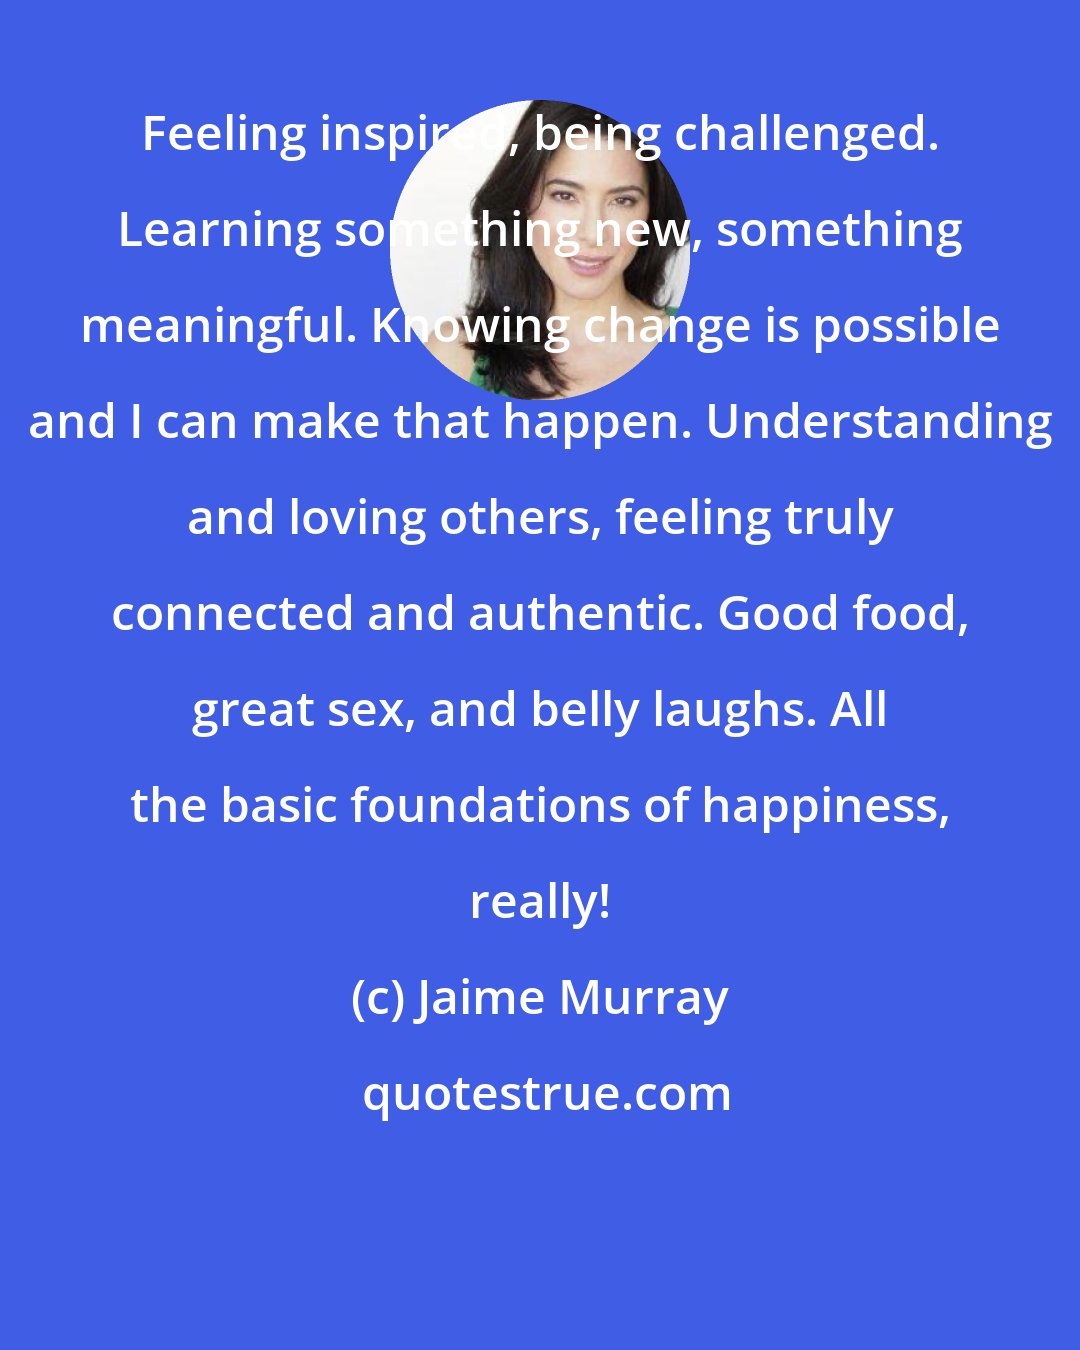 Jaime Murray: Feeling inspired, being challenged. Learning something new, something meaningful. Knowing change is possible and I can make that happen. Understanding and loving others, feeling truly connected and authentic. Good food, great sex, and belly laughs. All the basic foundations of happiness, really!